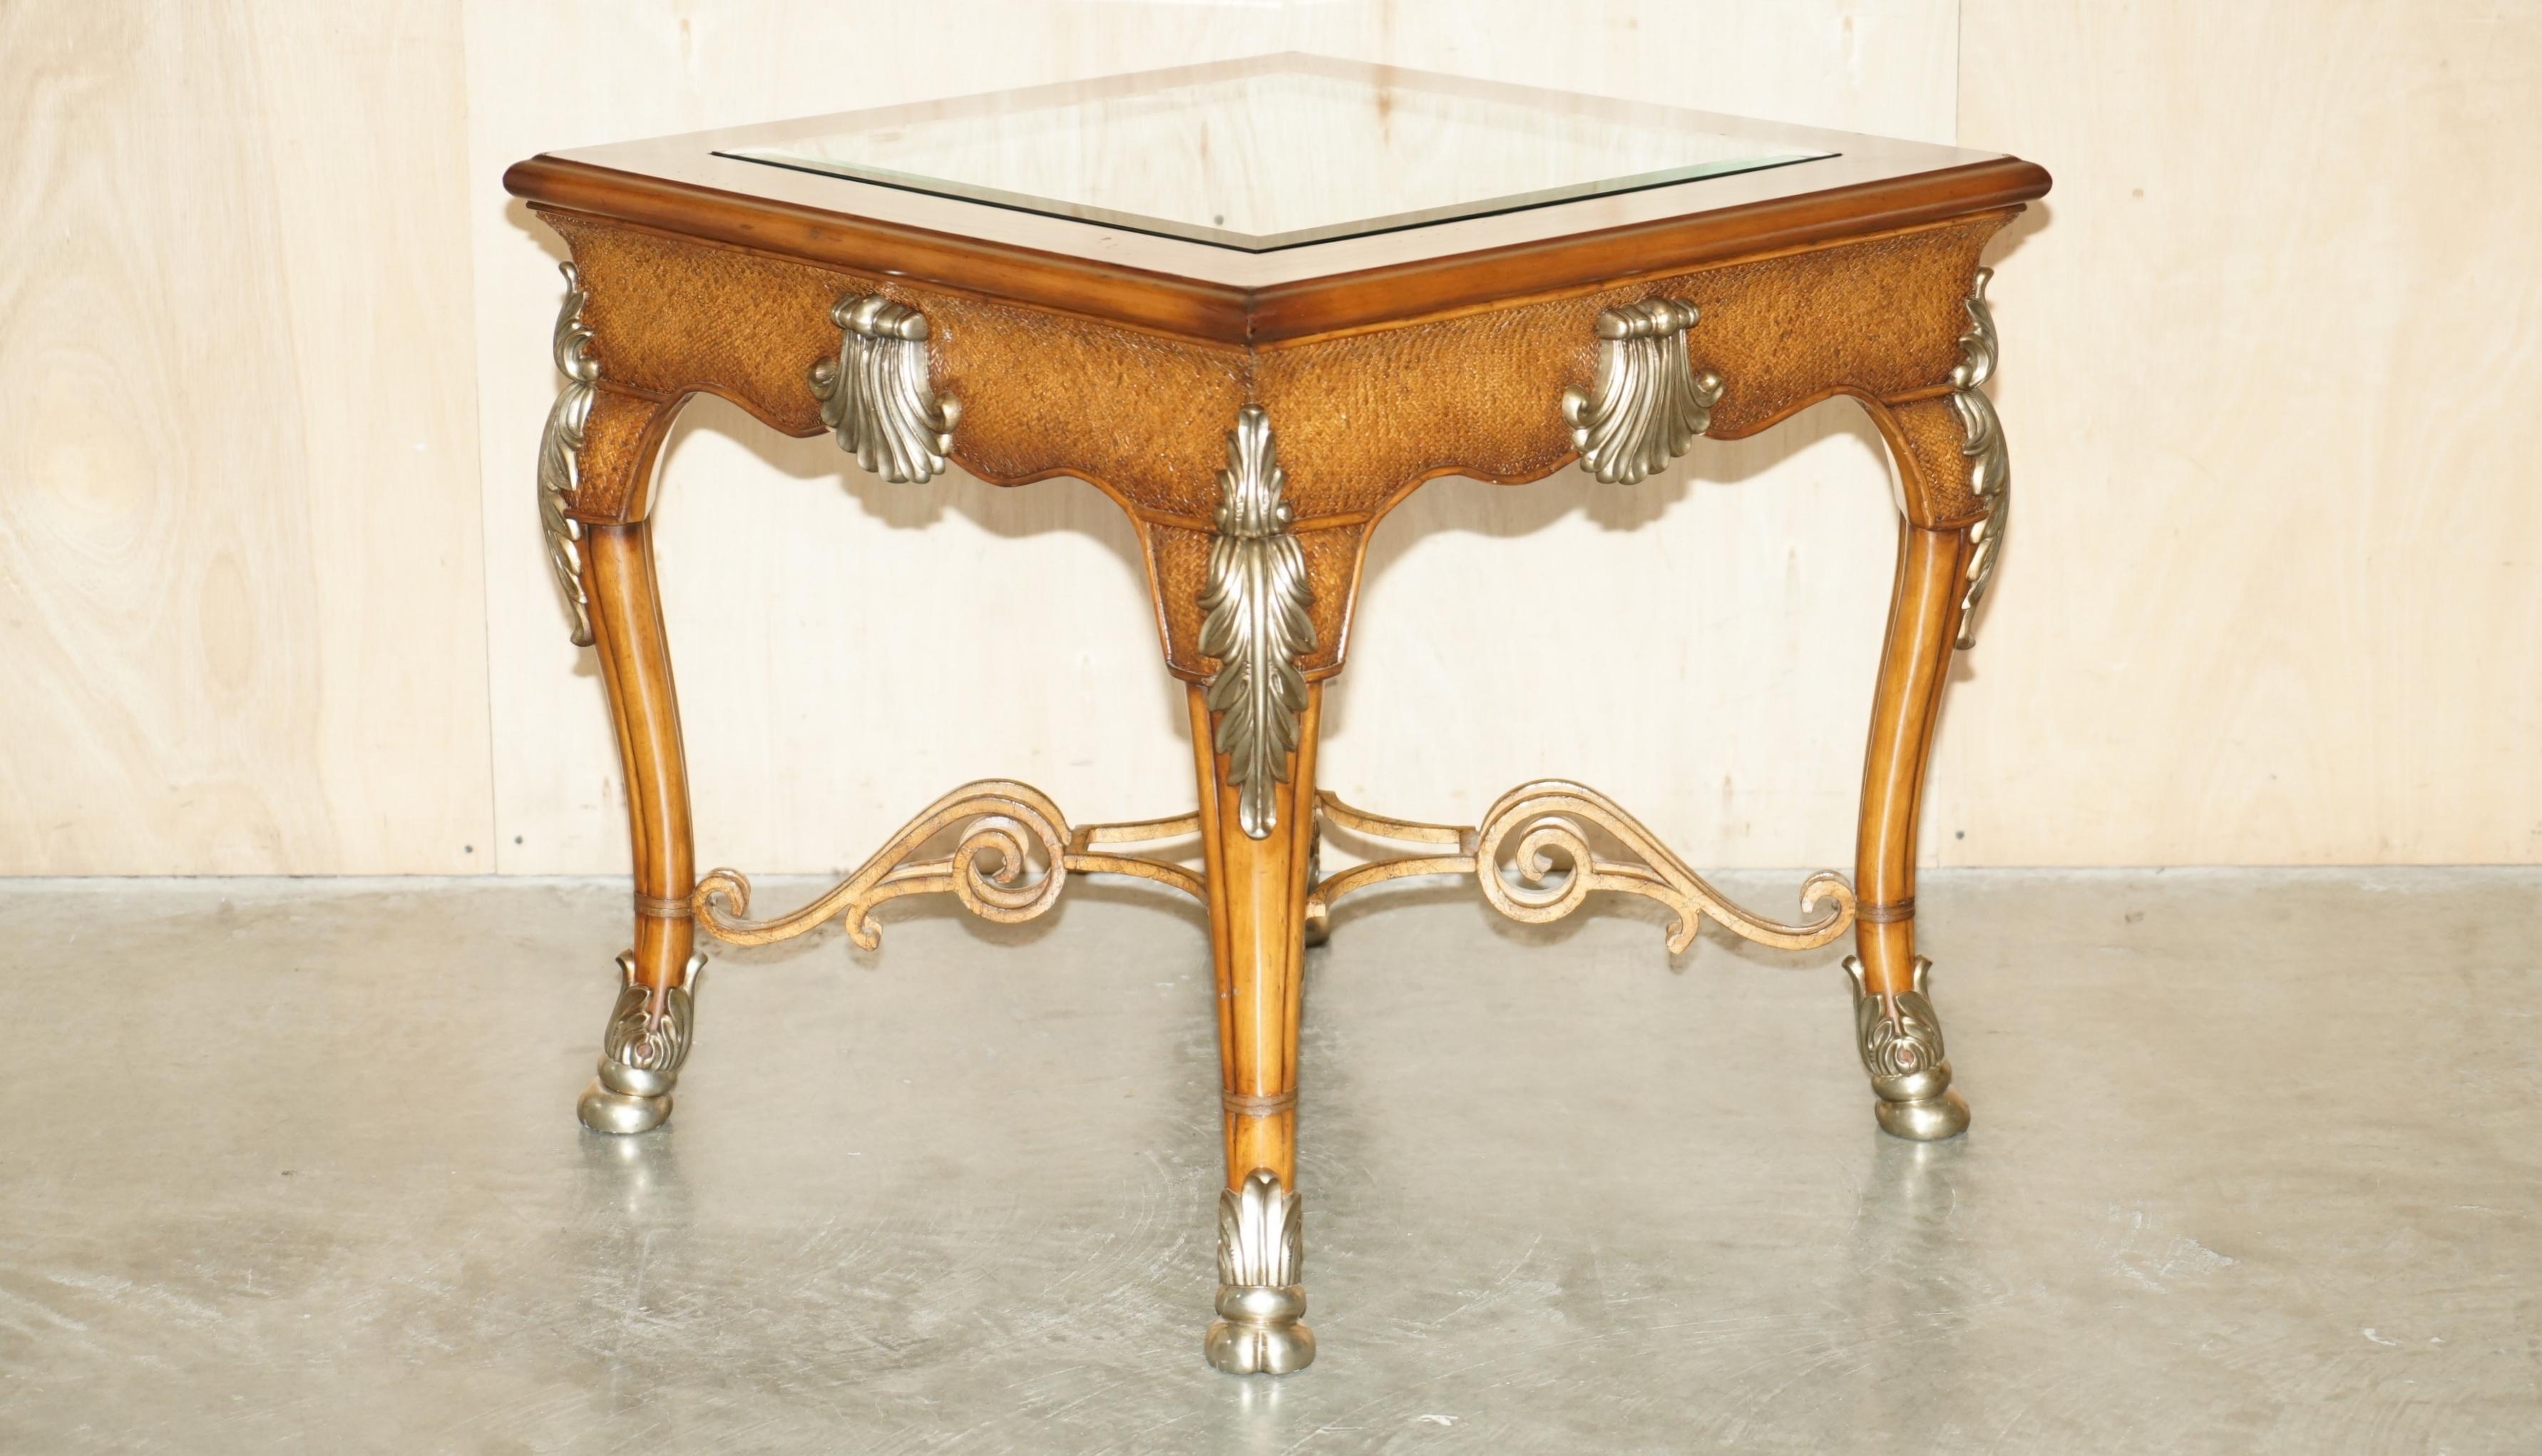 Royal House Antiques is delighted to offer for sale this absolutely exquisite Thomasville Safari collection centre table which is part of a large suite 

I have a rather lovely suite of this Thomasville furniture to include an eight person extending